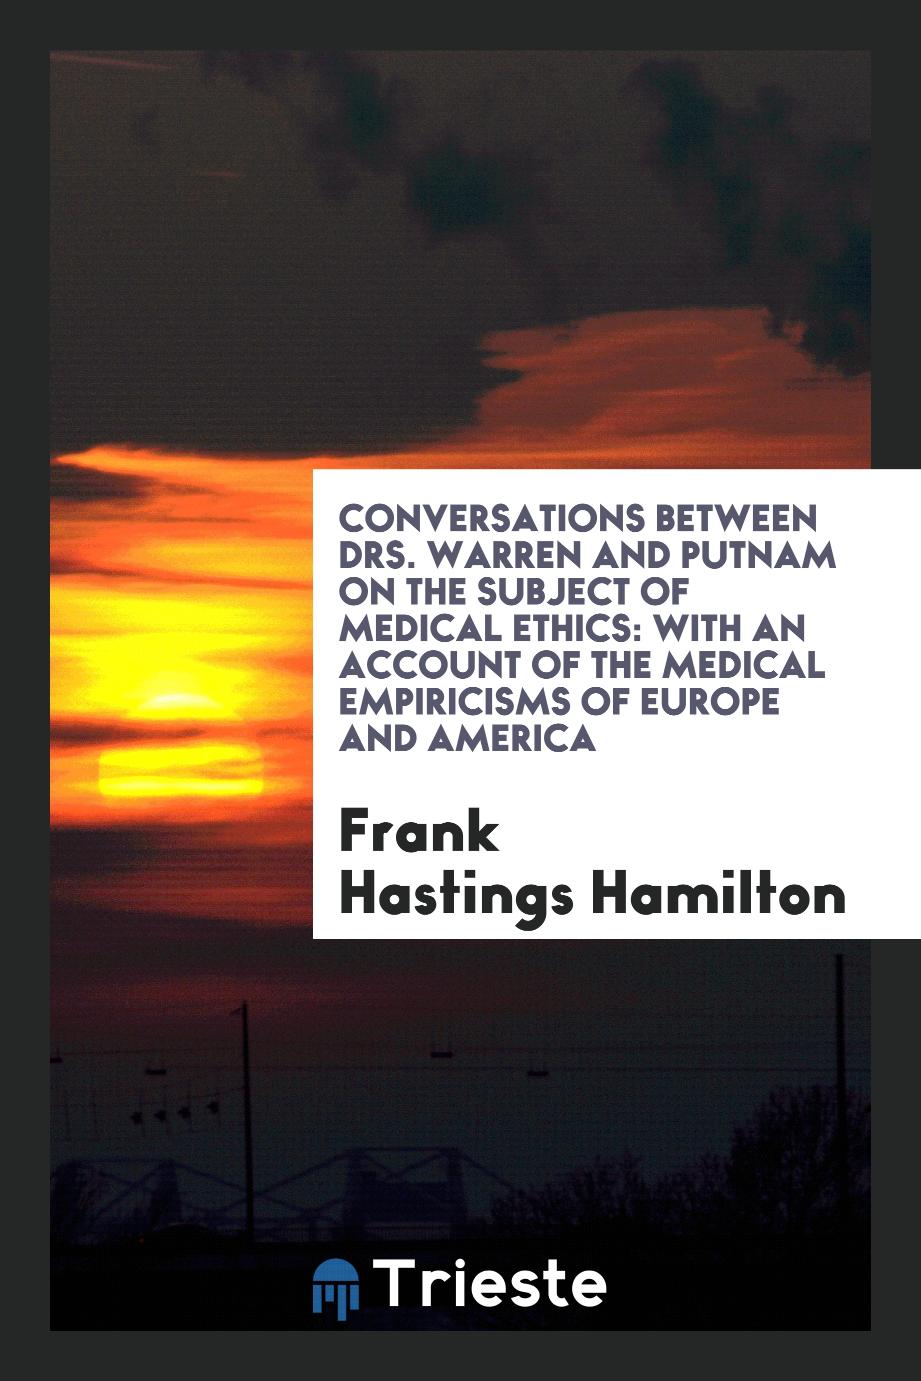 Conversations Between Drs. Warren and Putnam on the Subject of Medical Ethics: With an Account of the Medical Empiricisms of Europe and America